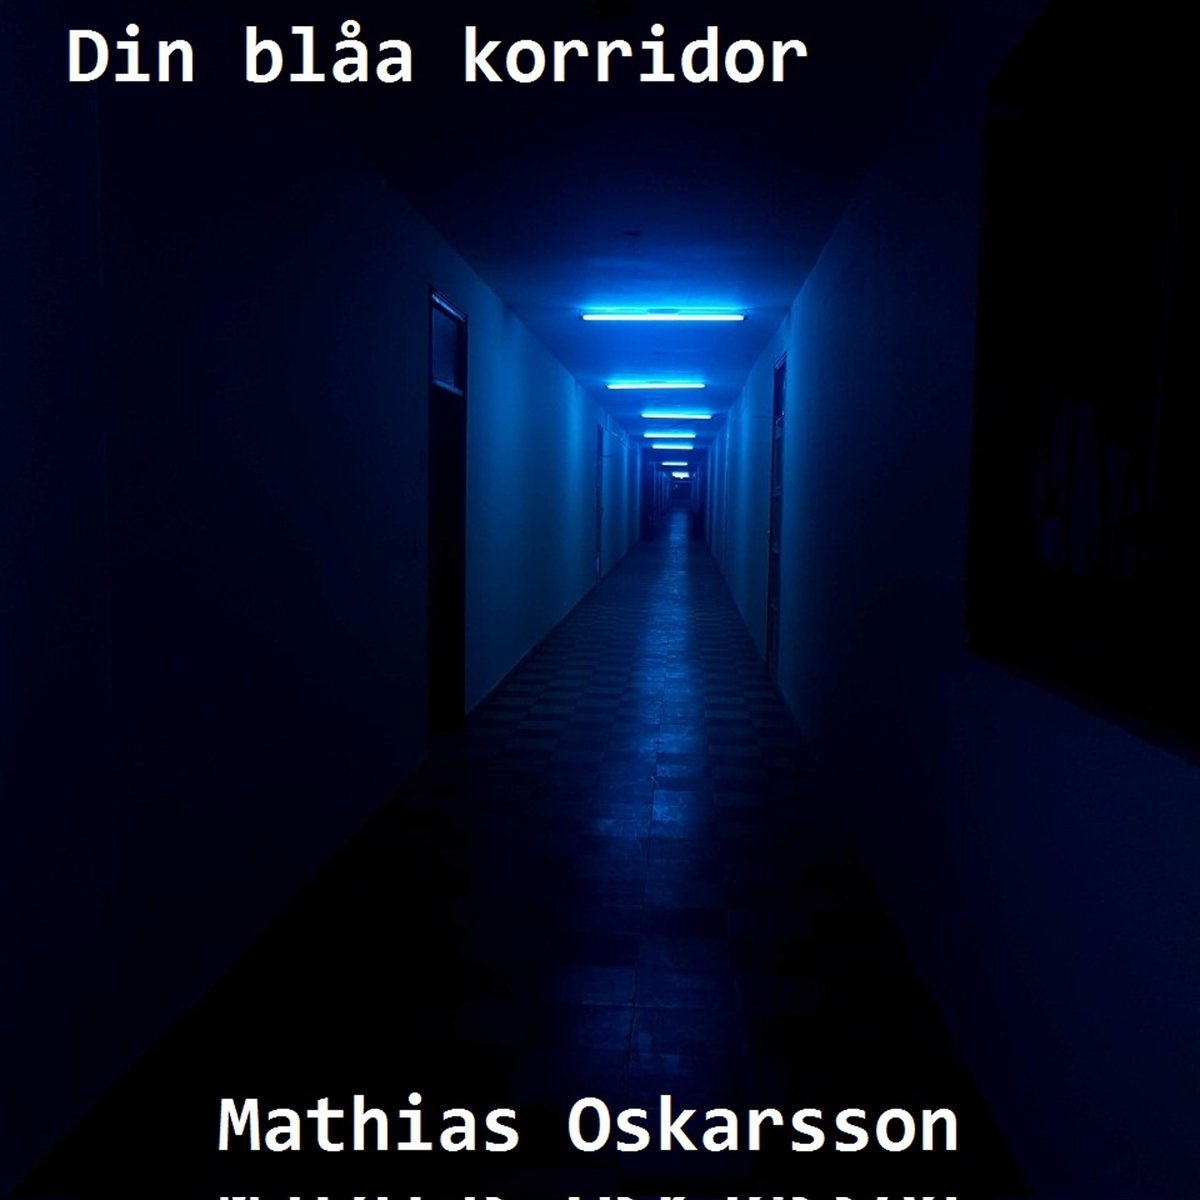 First track with swedish🇸🇪 lyrics will be released this fall. I'm so excited to hear your thoughts once it goes live. 
##mathiasoskarsson #indieartist #artistoninstagram #newmusicsoon #newmusicthisfall #swedishartist #homestudioartist #soloartist #singlealert #pianomusic